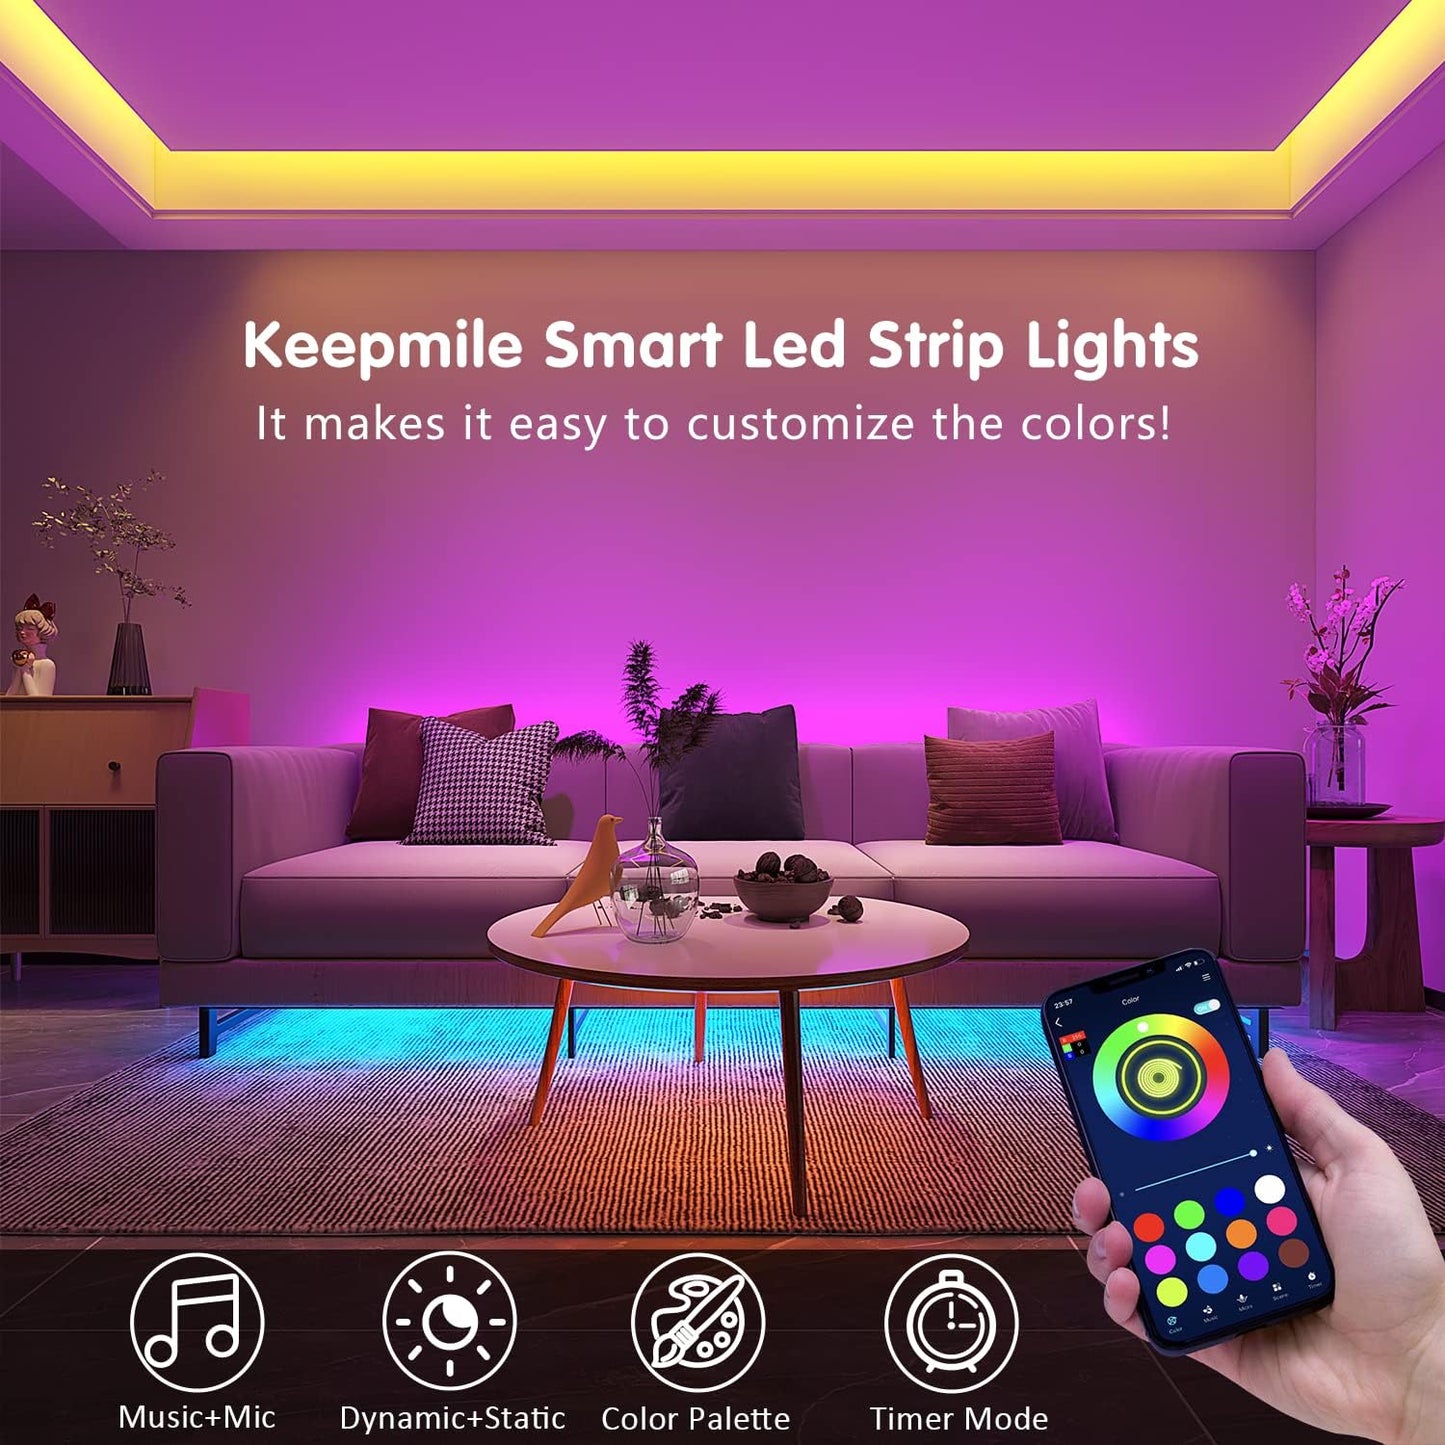 100ft Led Strip Lights (2 Rolls of 50ft) Bluetooth Smart App Music Sync Color Changing RGB Led Light Strip with Remote and Power Adapter